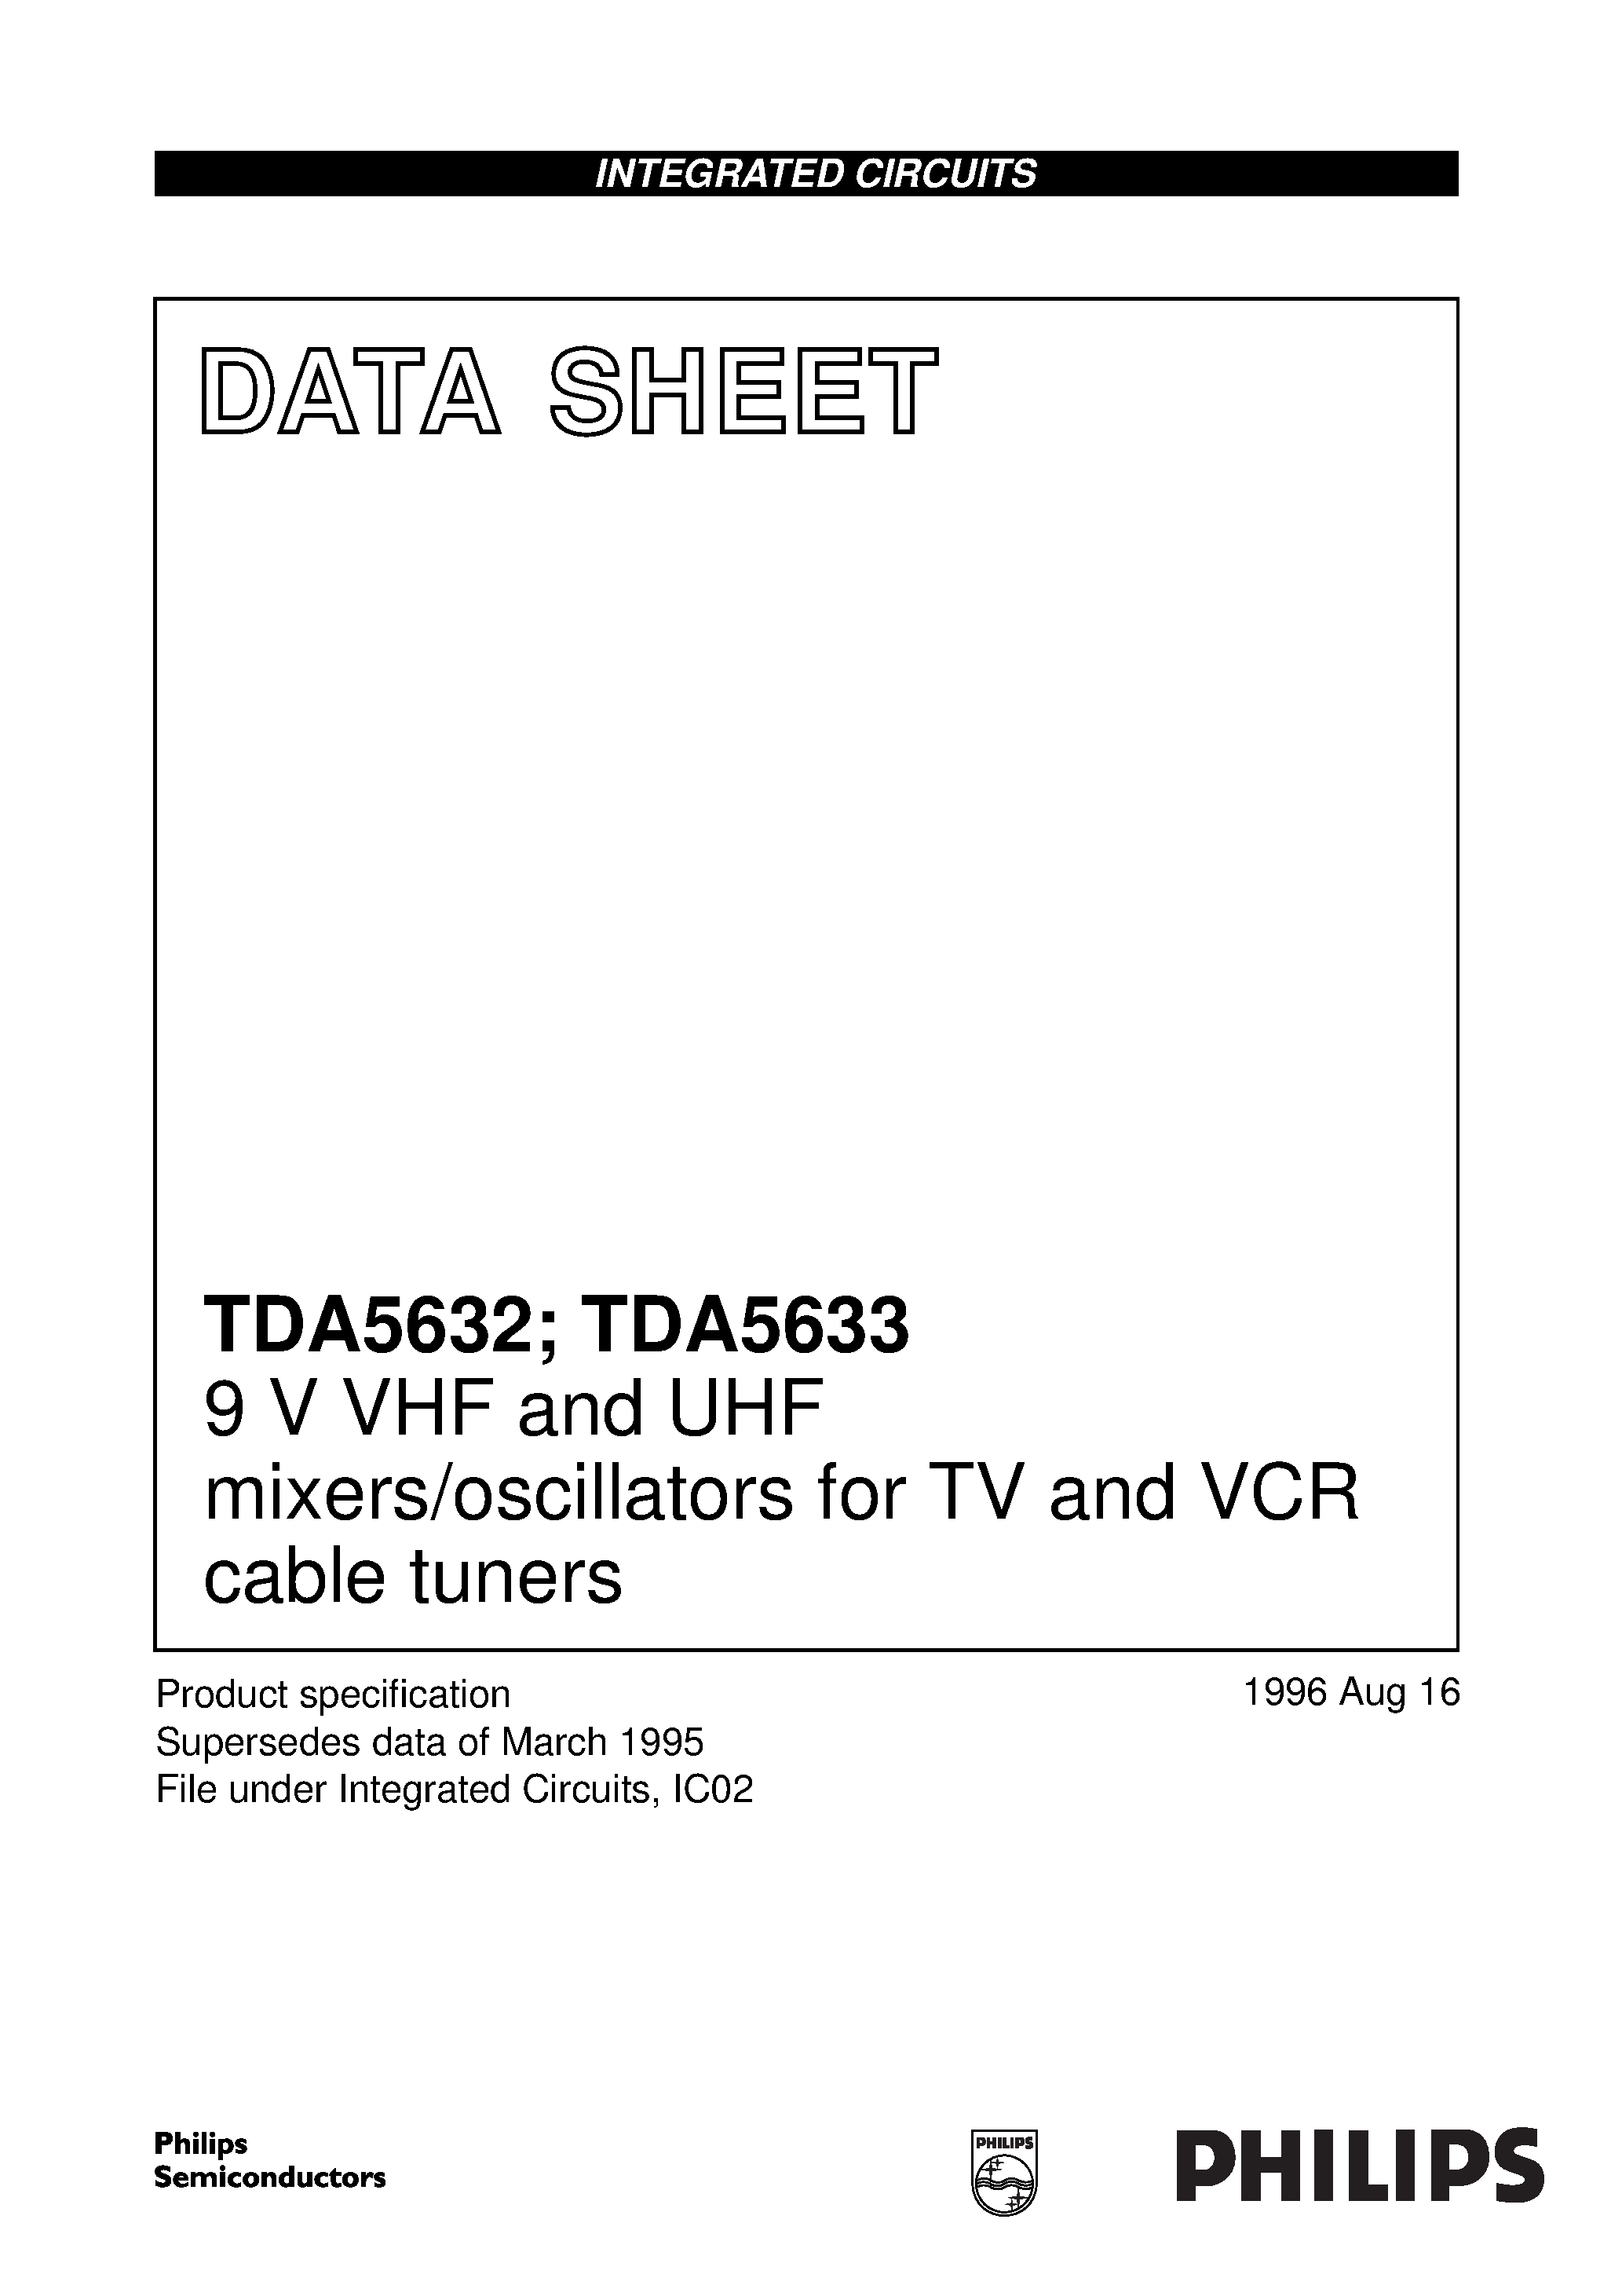 Даташит TDA5632T - 9 V VHF and UHF mixers/oscillators for TV and VCR cable tuners страница 1